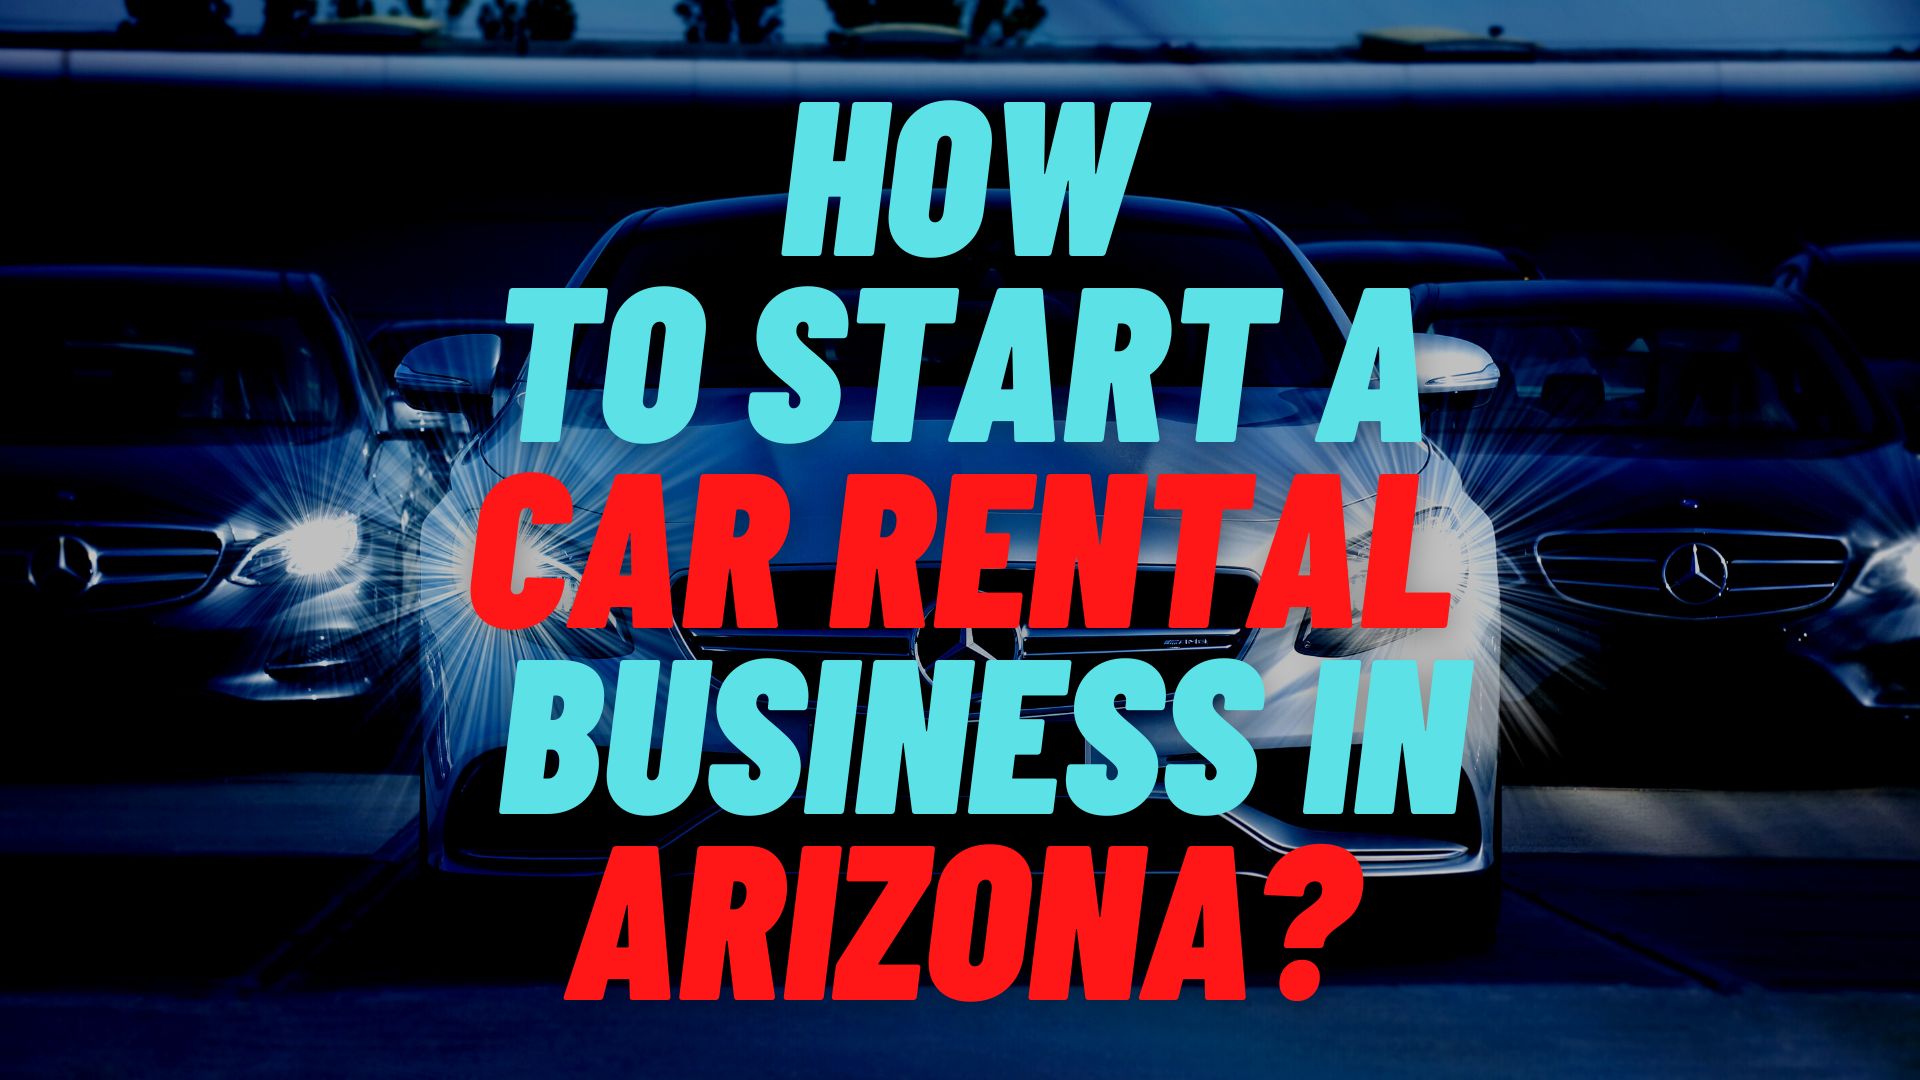 How to start a car rental business in Arizona